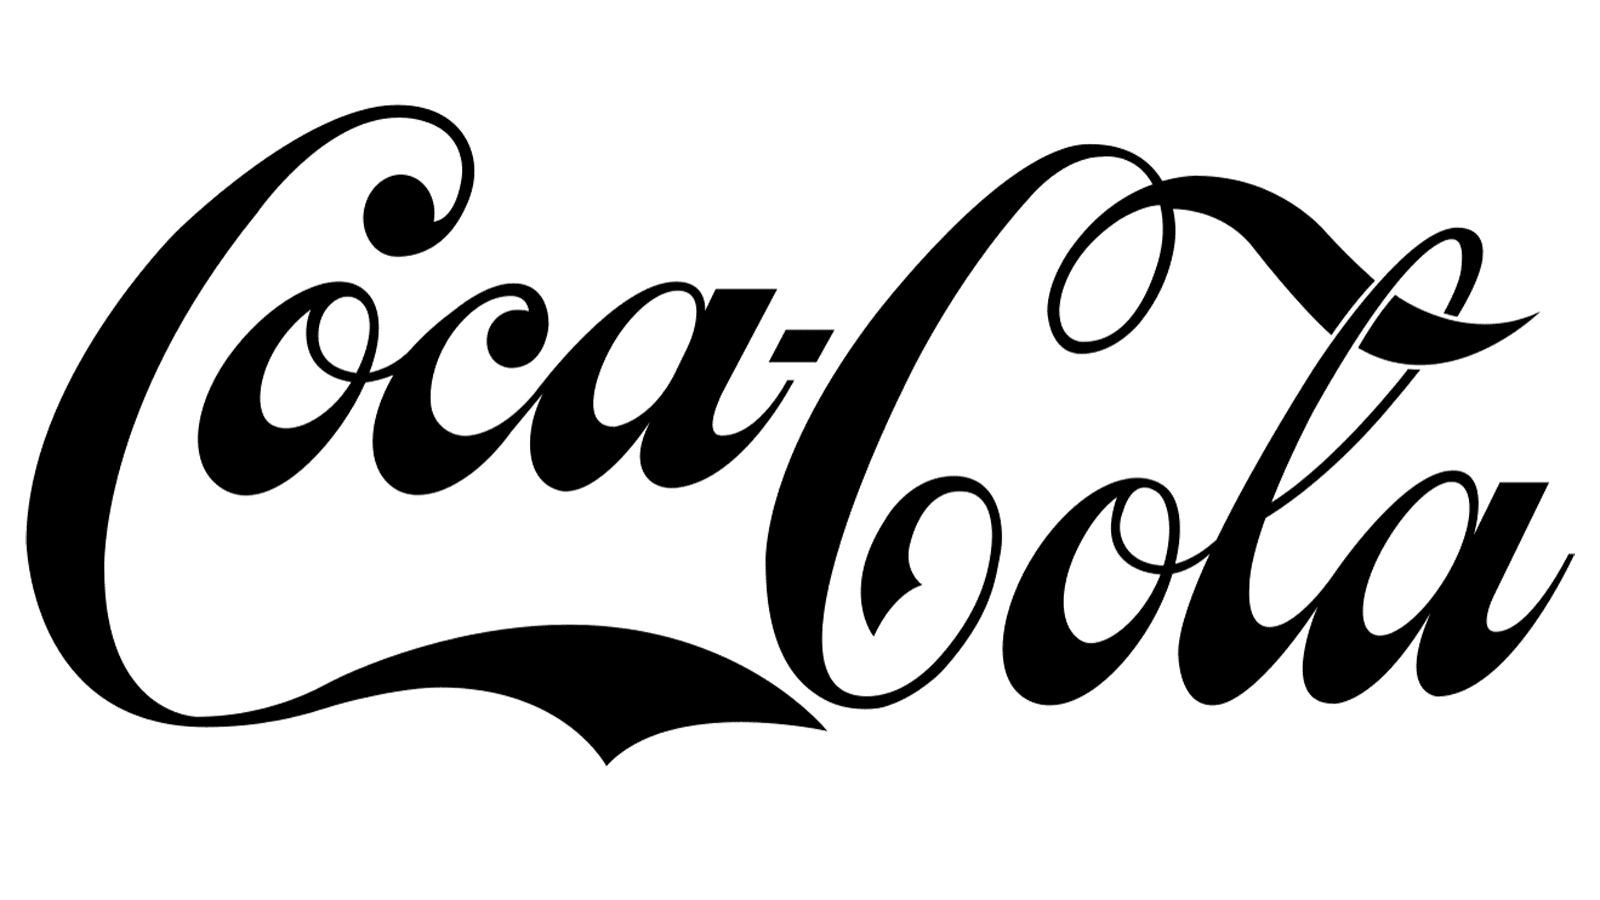 Coca-Cola Logo and sign, new logo meaning and history, PNG, SVG